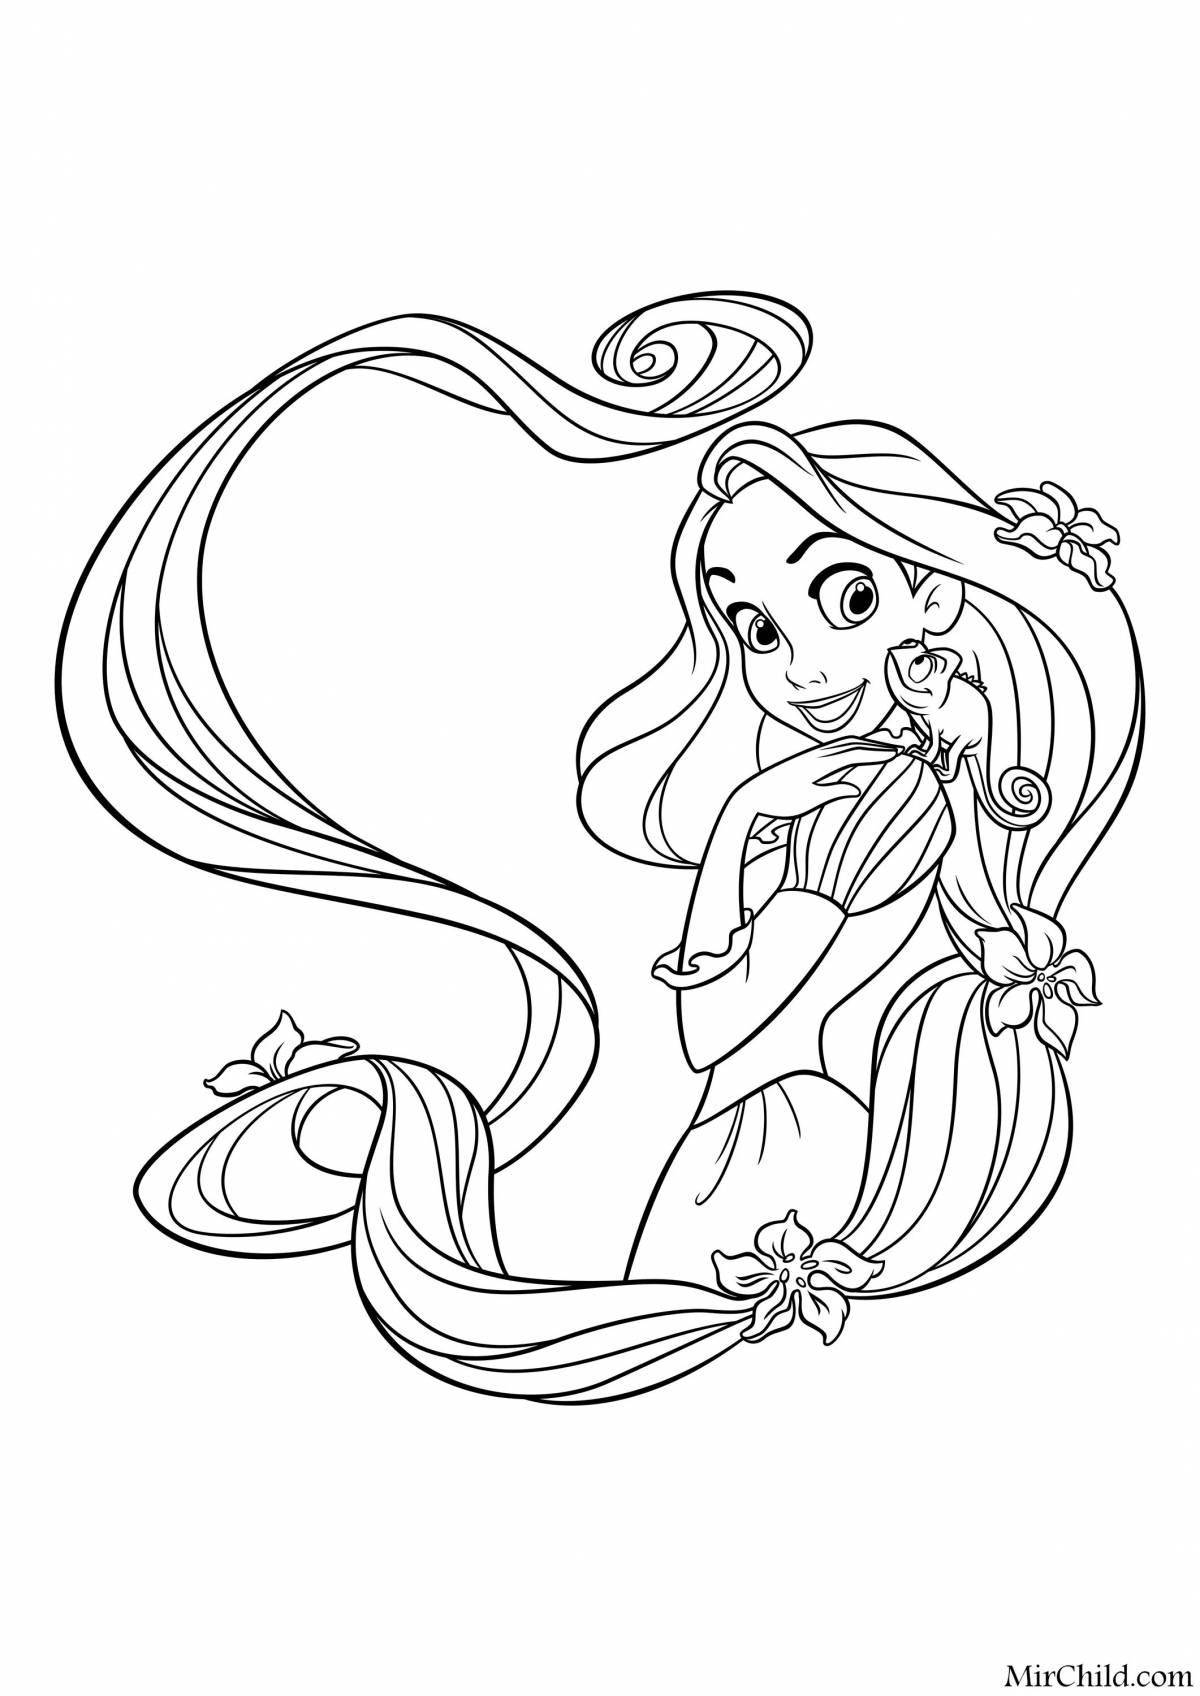 Glamourous rapunzel coloring book for kids